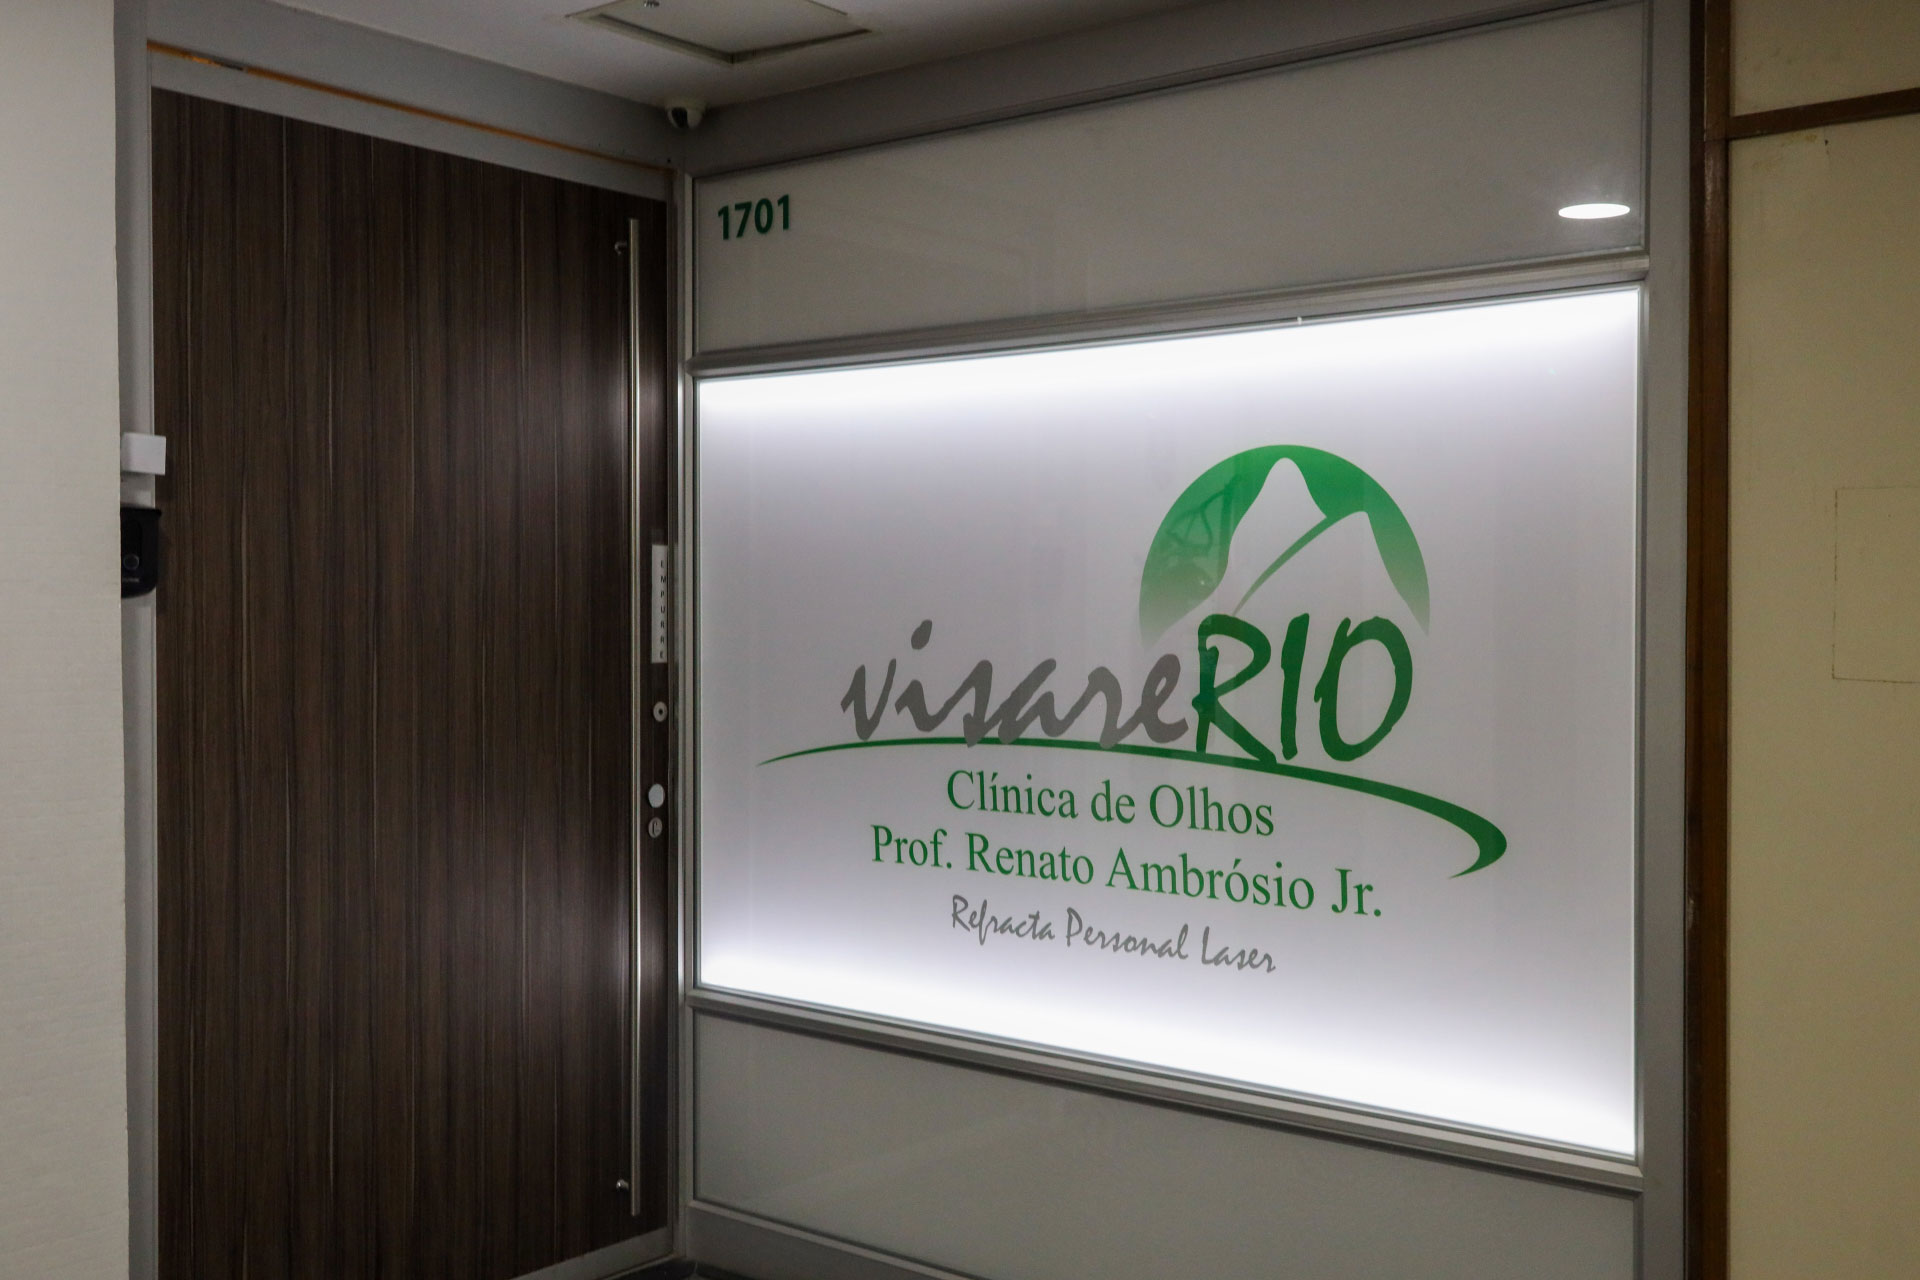 Entrance area of the clinic